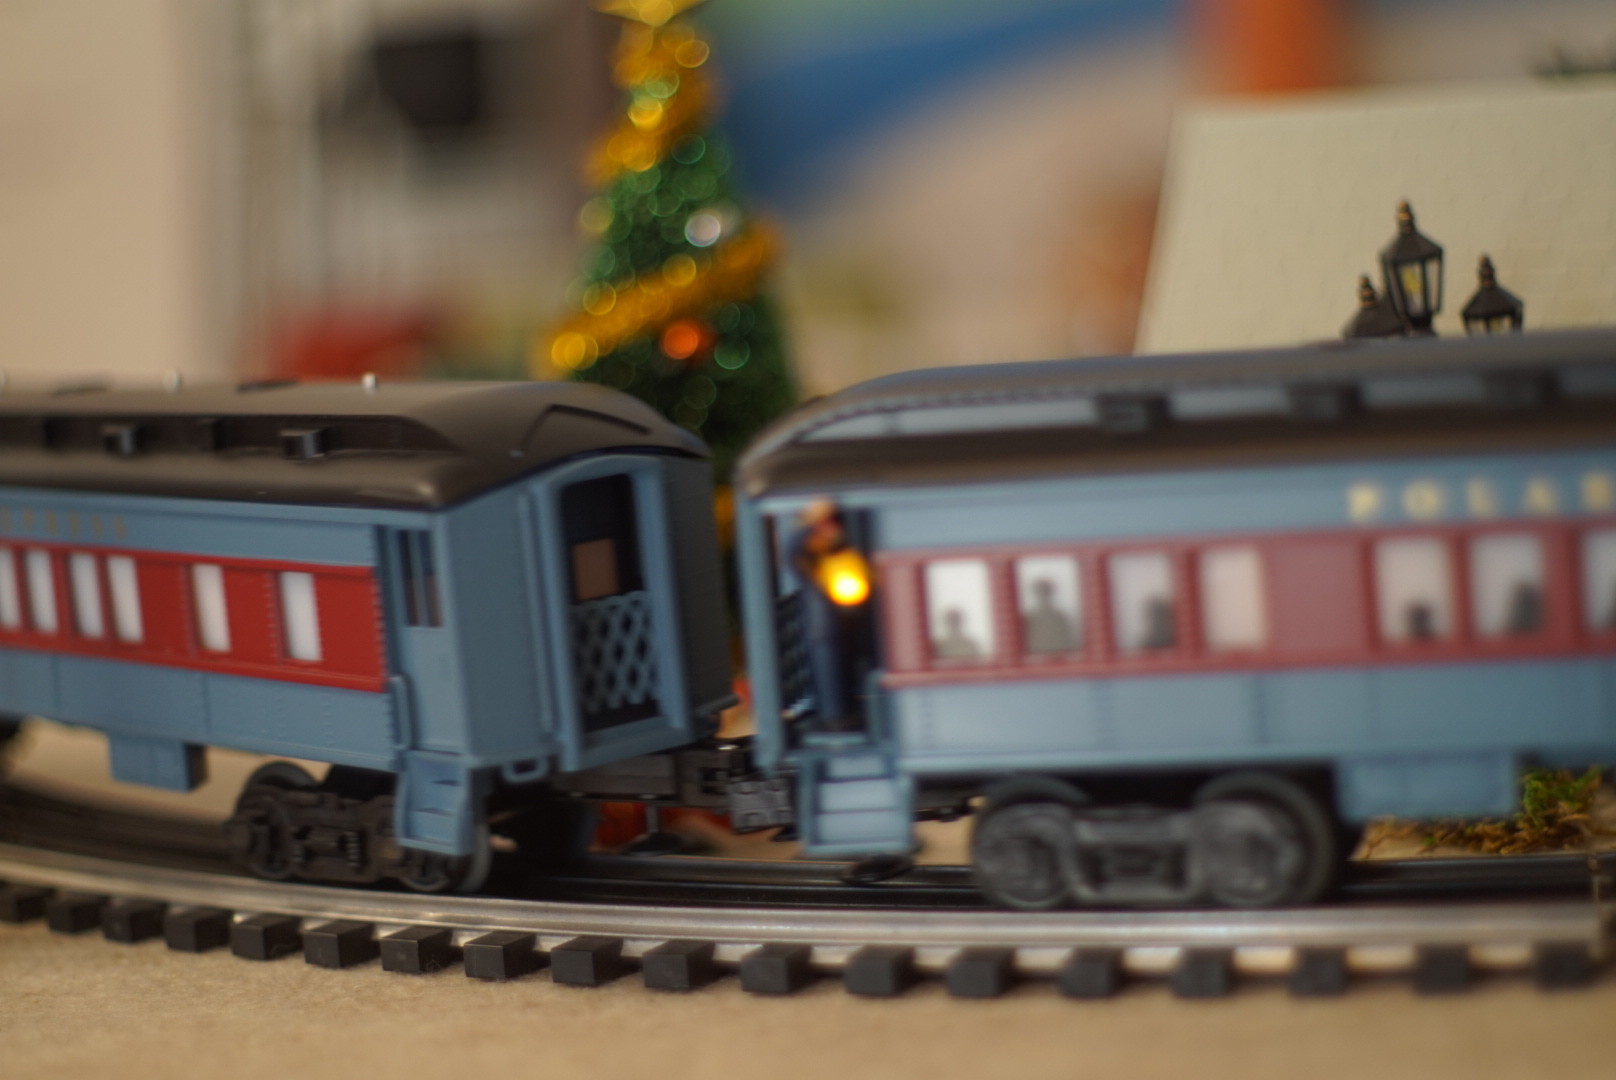 A miniature Polar Express zooms past Christmas trees and carolers